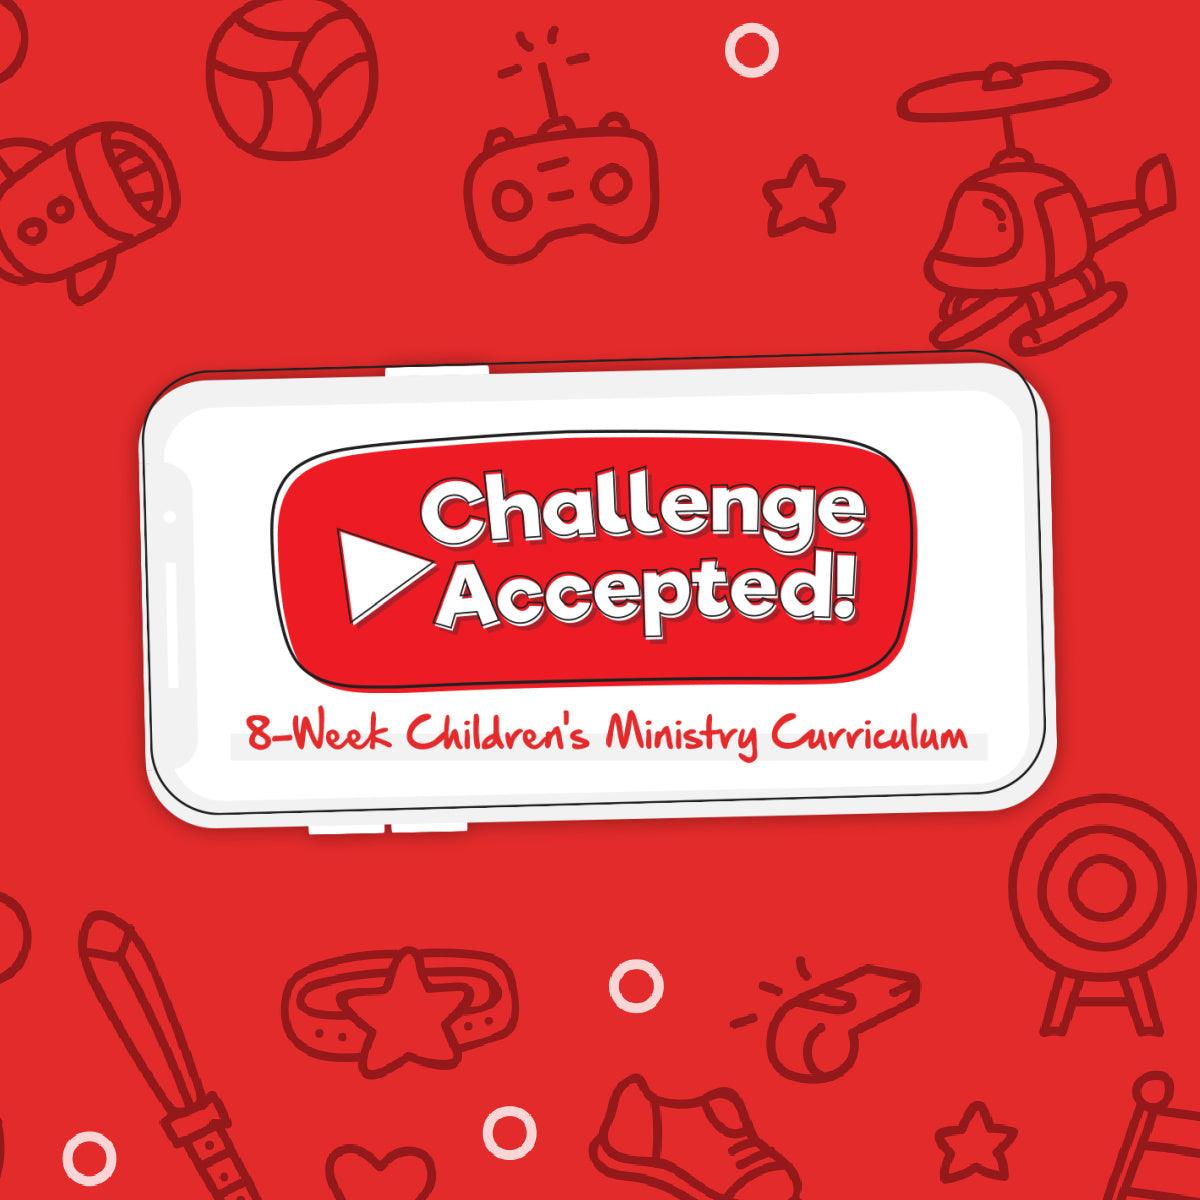 Challenge Accepted: 8-Week Children's Ministry Curriculum (download only) - Sunday School Store 